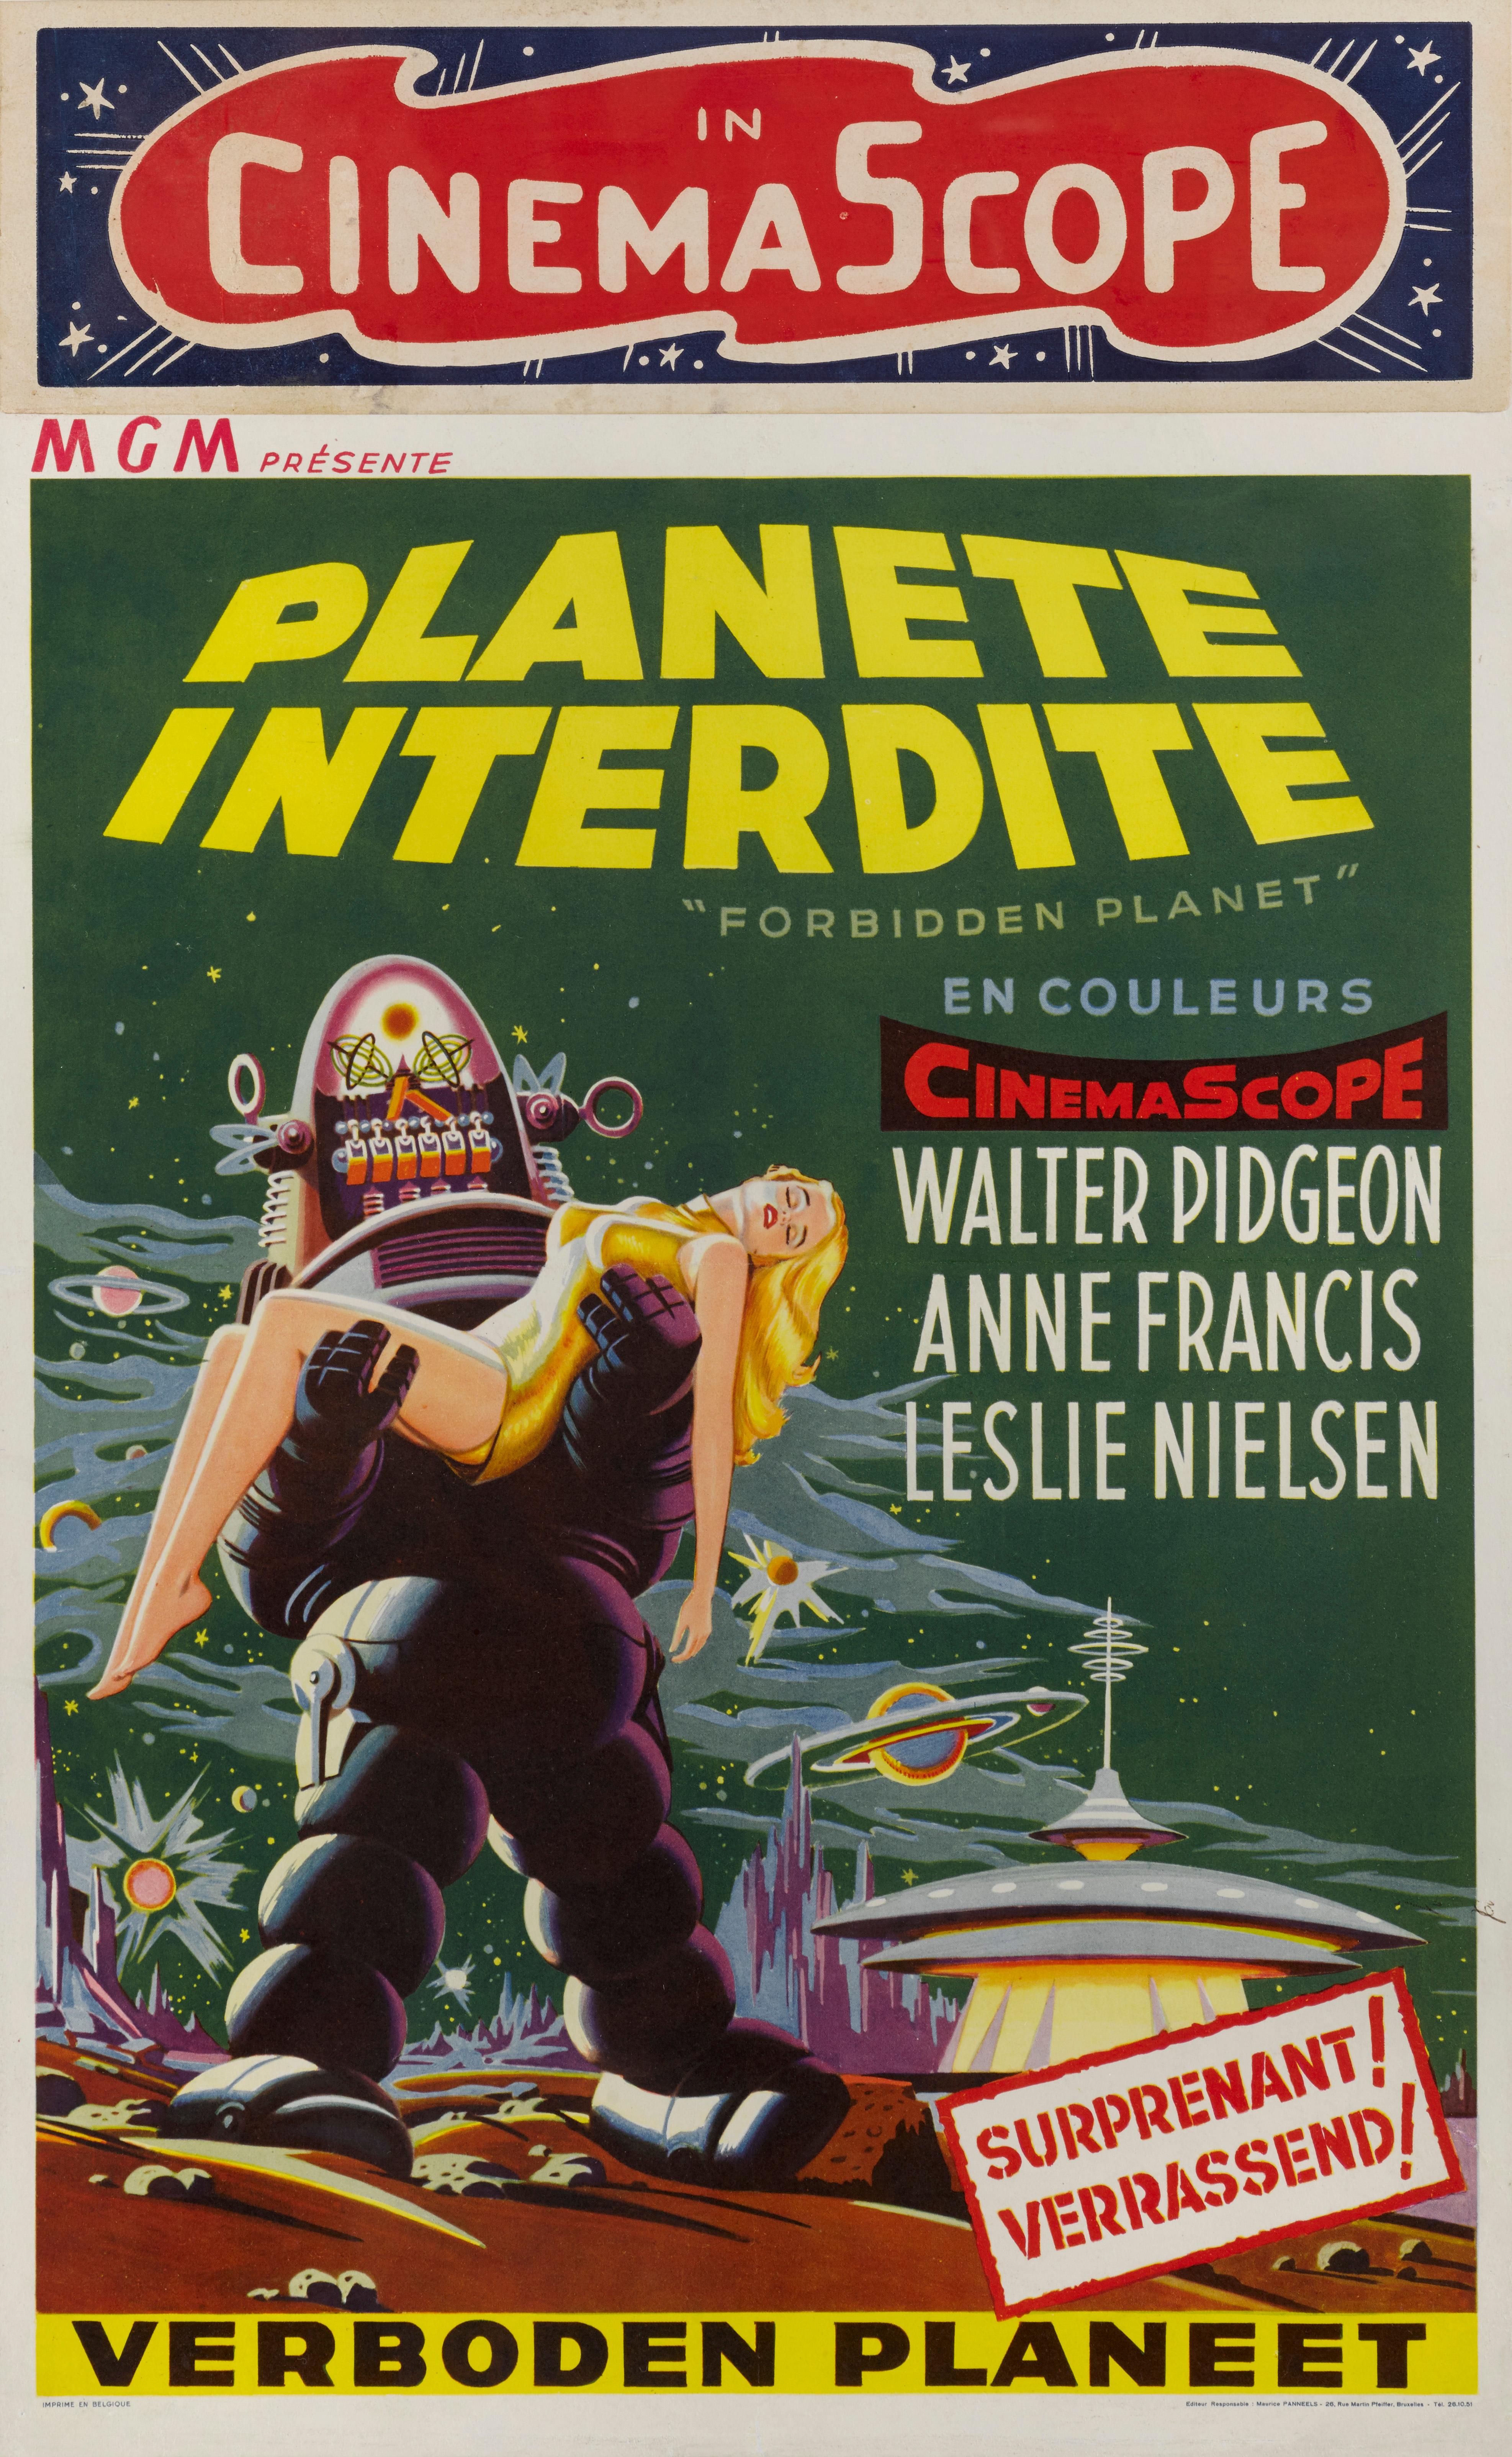 Original Belgian film poster for the Classic 1956 epic science fiction film.
Forbidden Planet is one of the most cherished sci-fi Classic films of all time. It is based on Shakespeare's The Tempest. The film was directed by Fred M. Wilcox, and